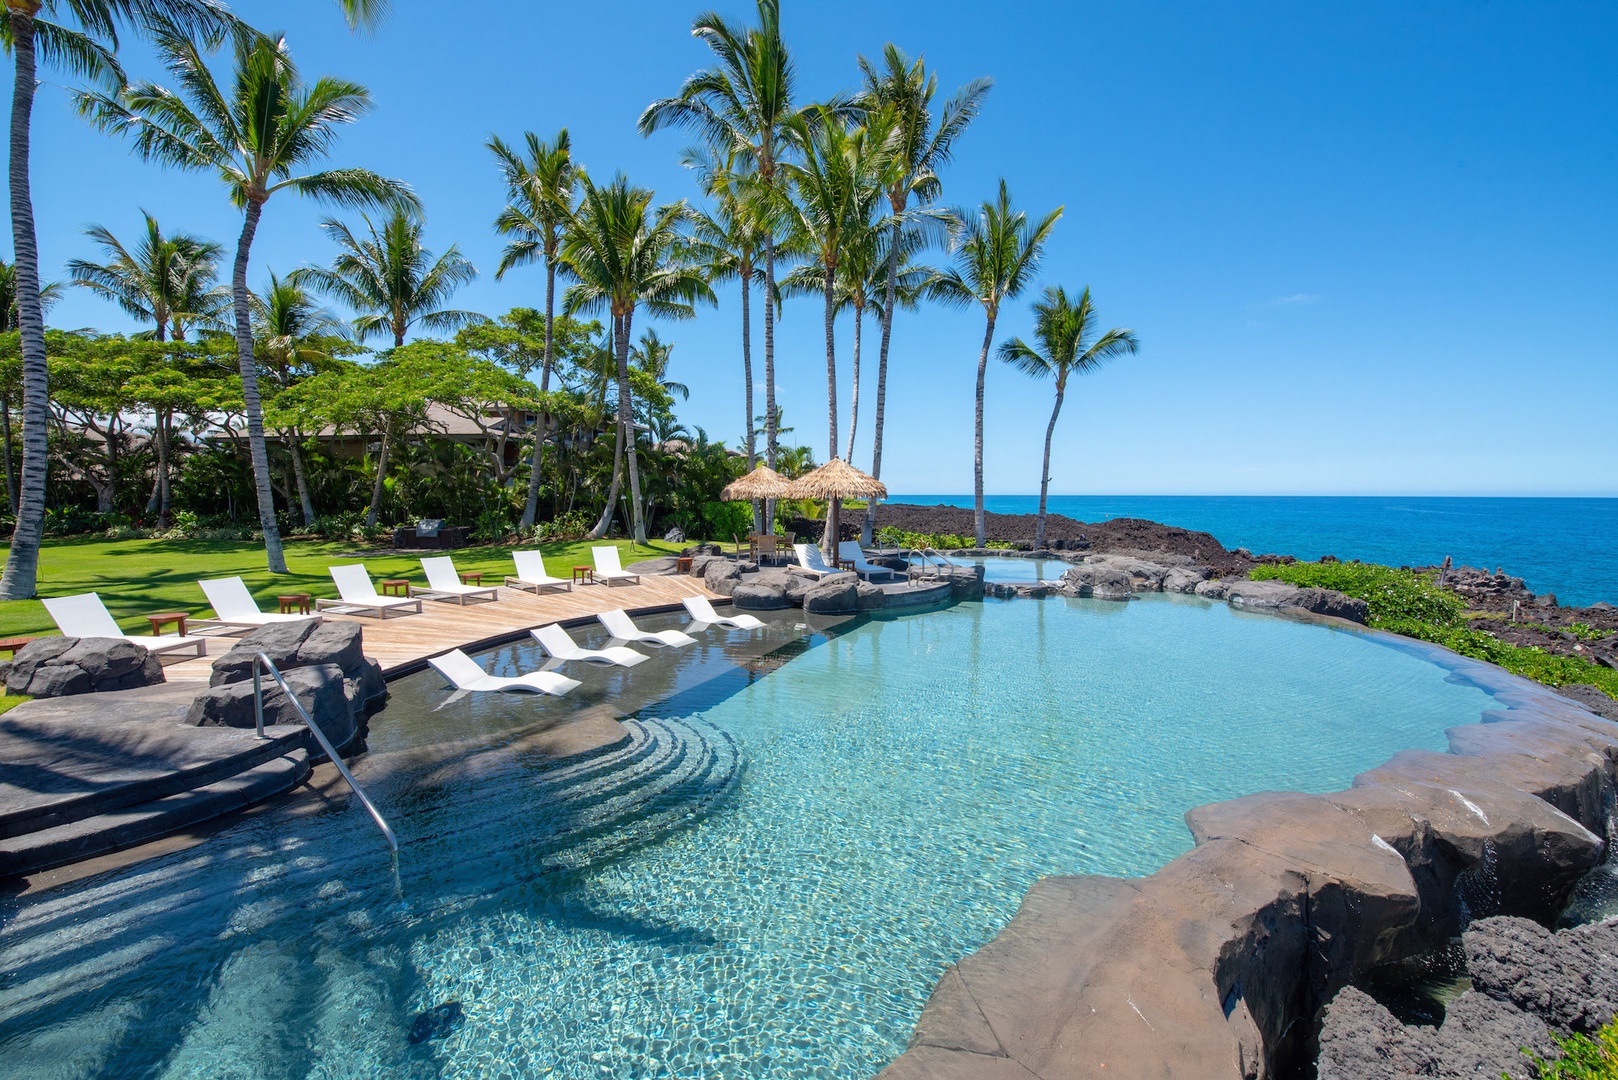 Kamuela Vacation Rentals, 3BD OneOcean (1C) at Mauna Lani Resort - The Grotto Amenity Center Infinity Pool at the Seacliff's Edge